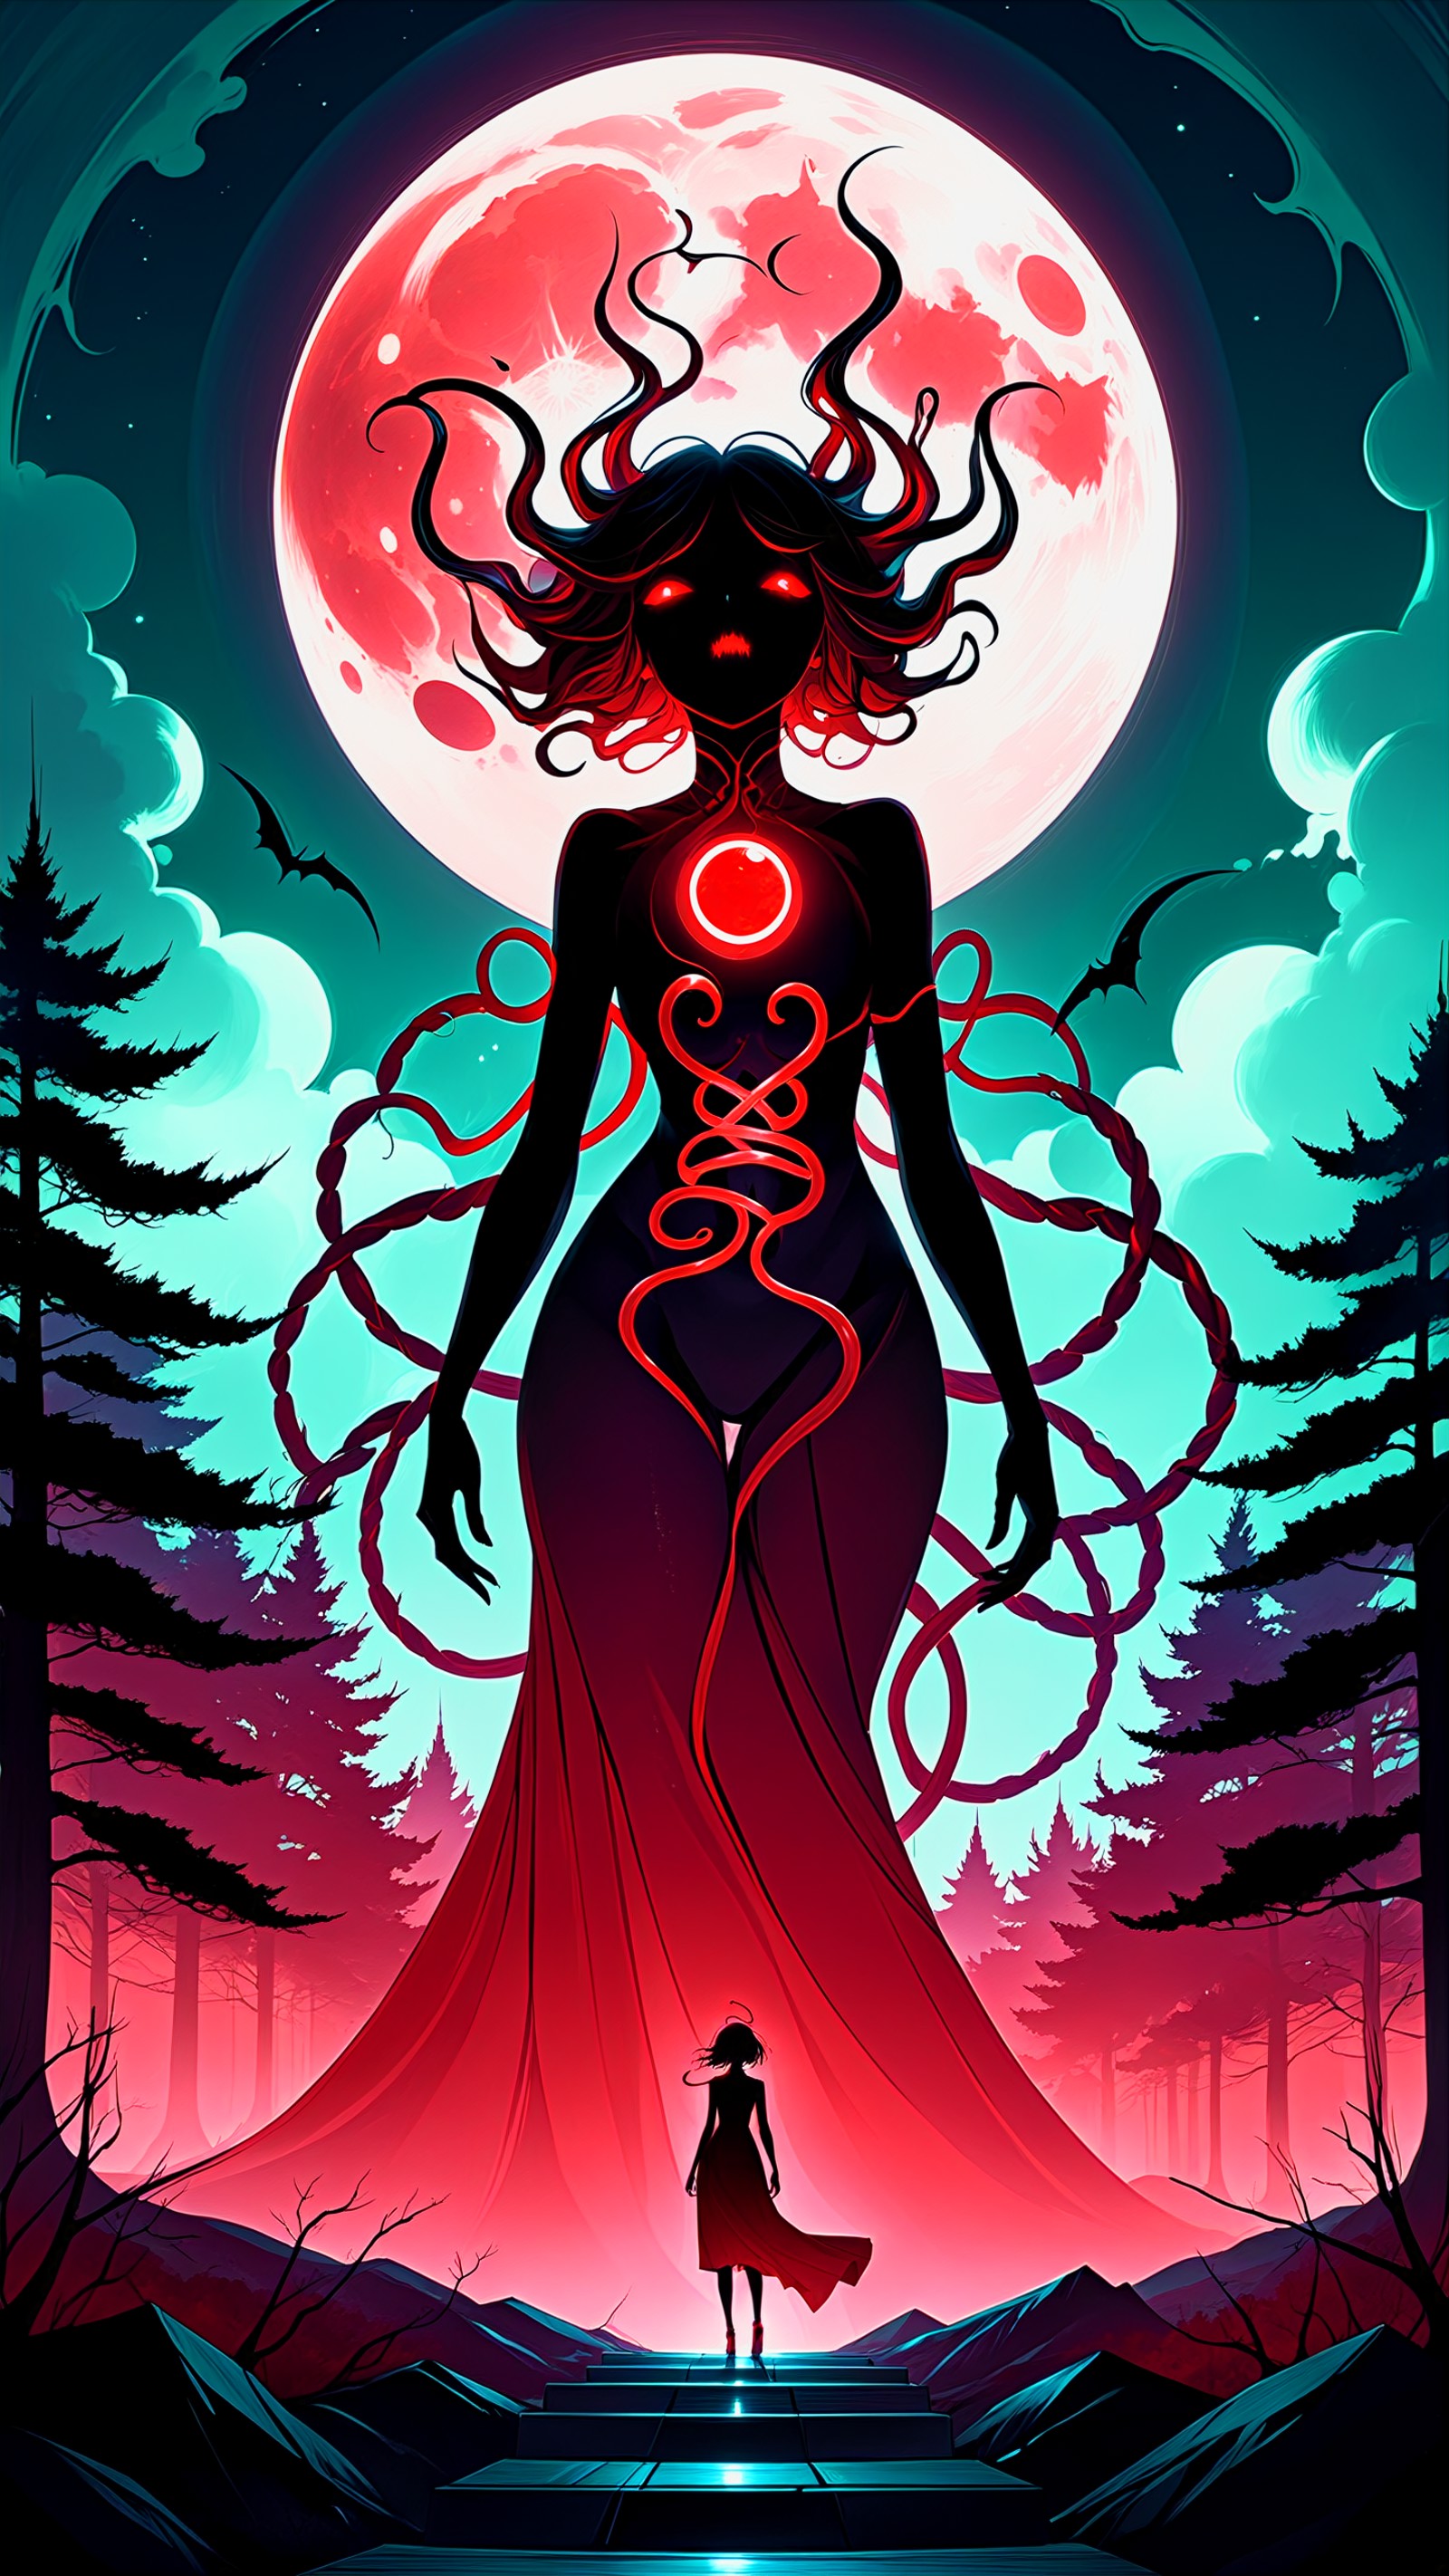 Scif vibes, Otherworldly, Cinematic, Ominous mountain, digital art, inspired by Cyril Rolando, digital art, blood red moon...